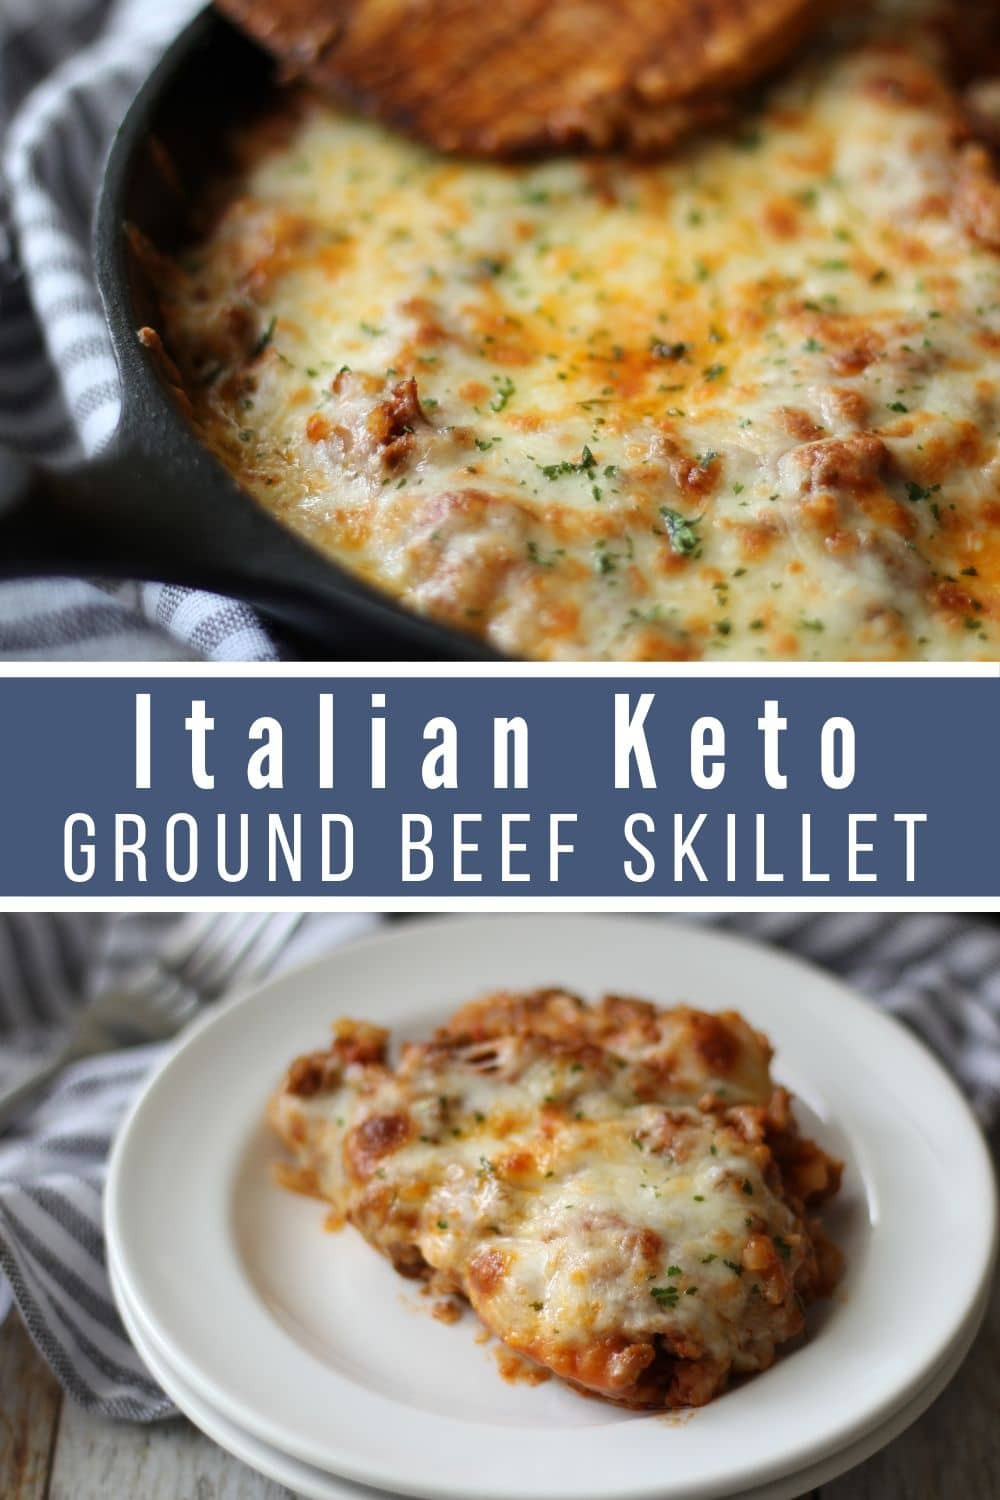 Ground Beef Keto Low Carb
 Low Carb Ground Beef Recipe Italian Keto Beef Skillet